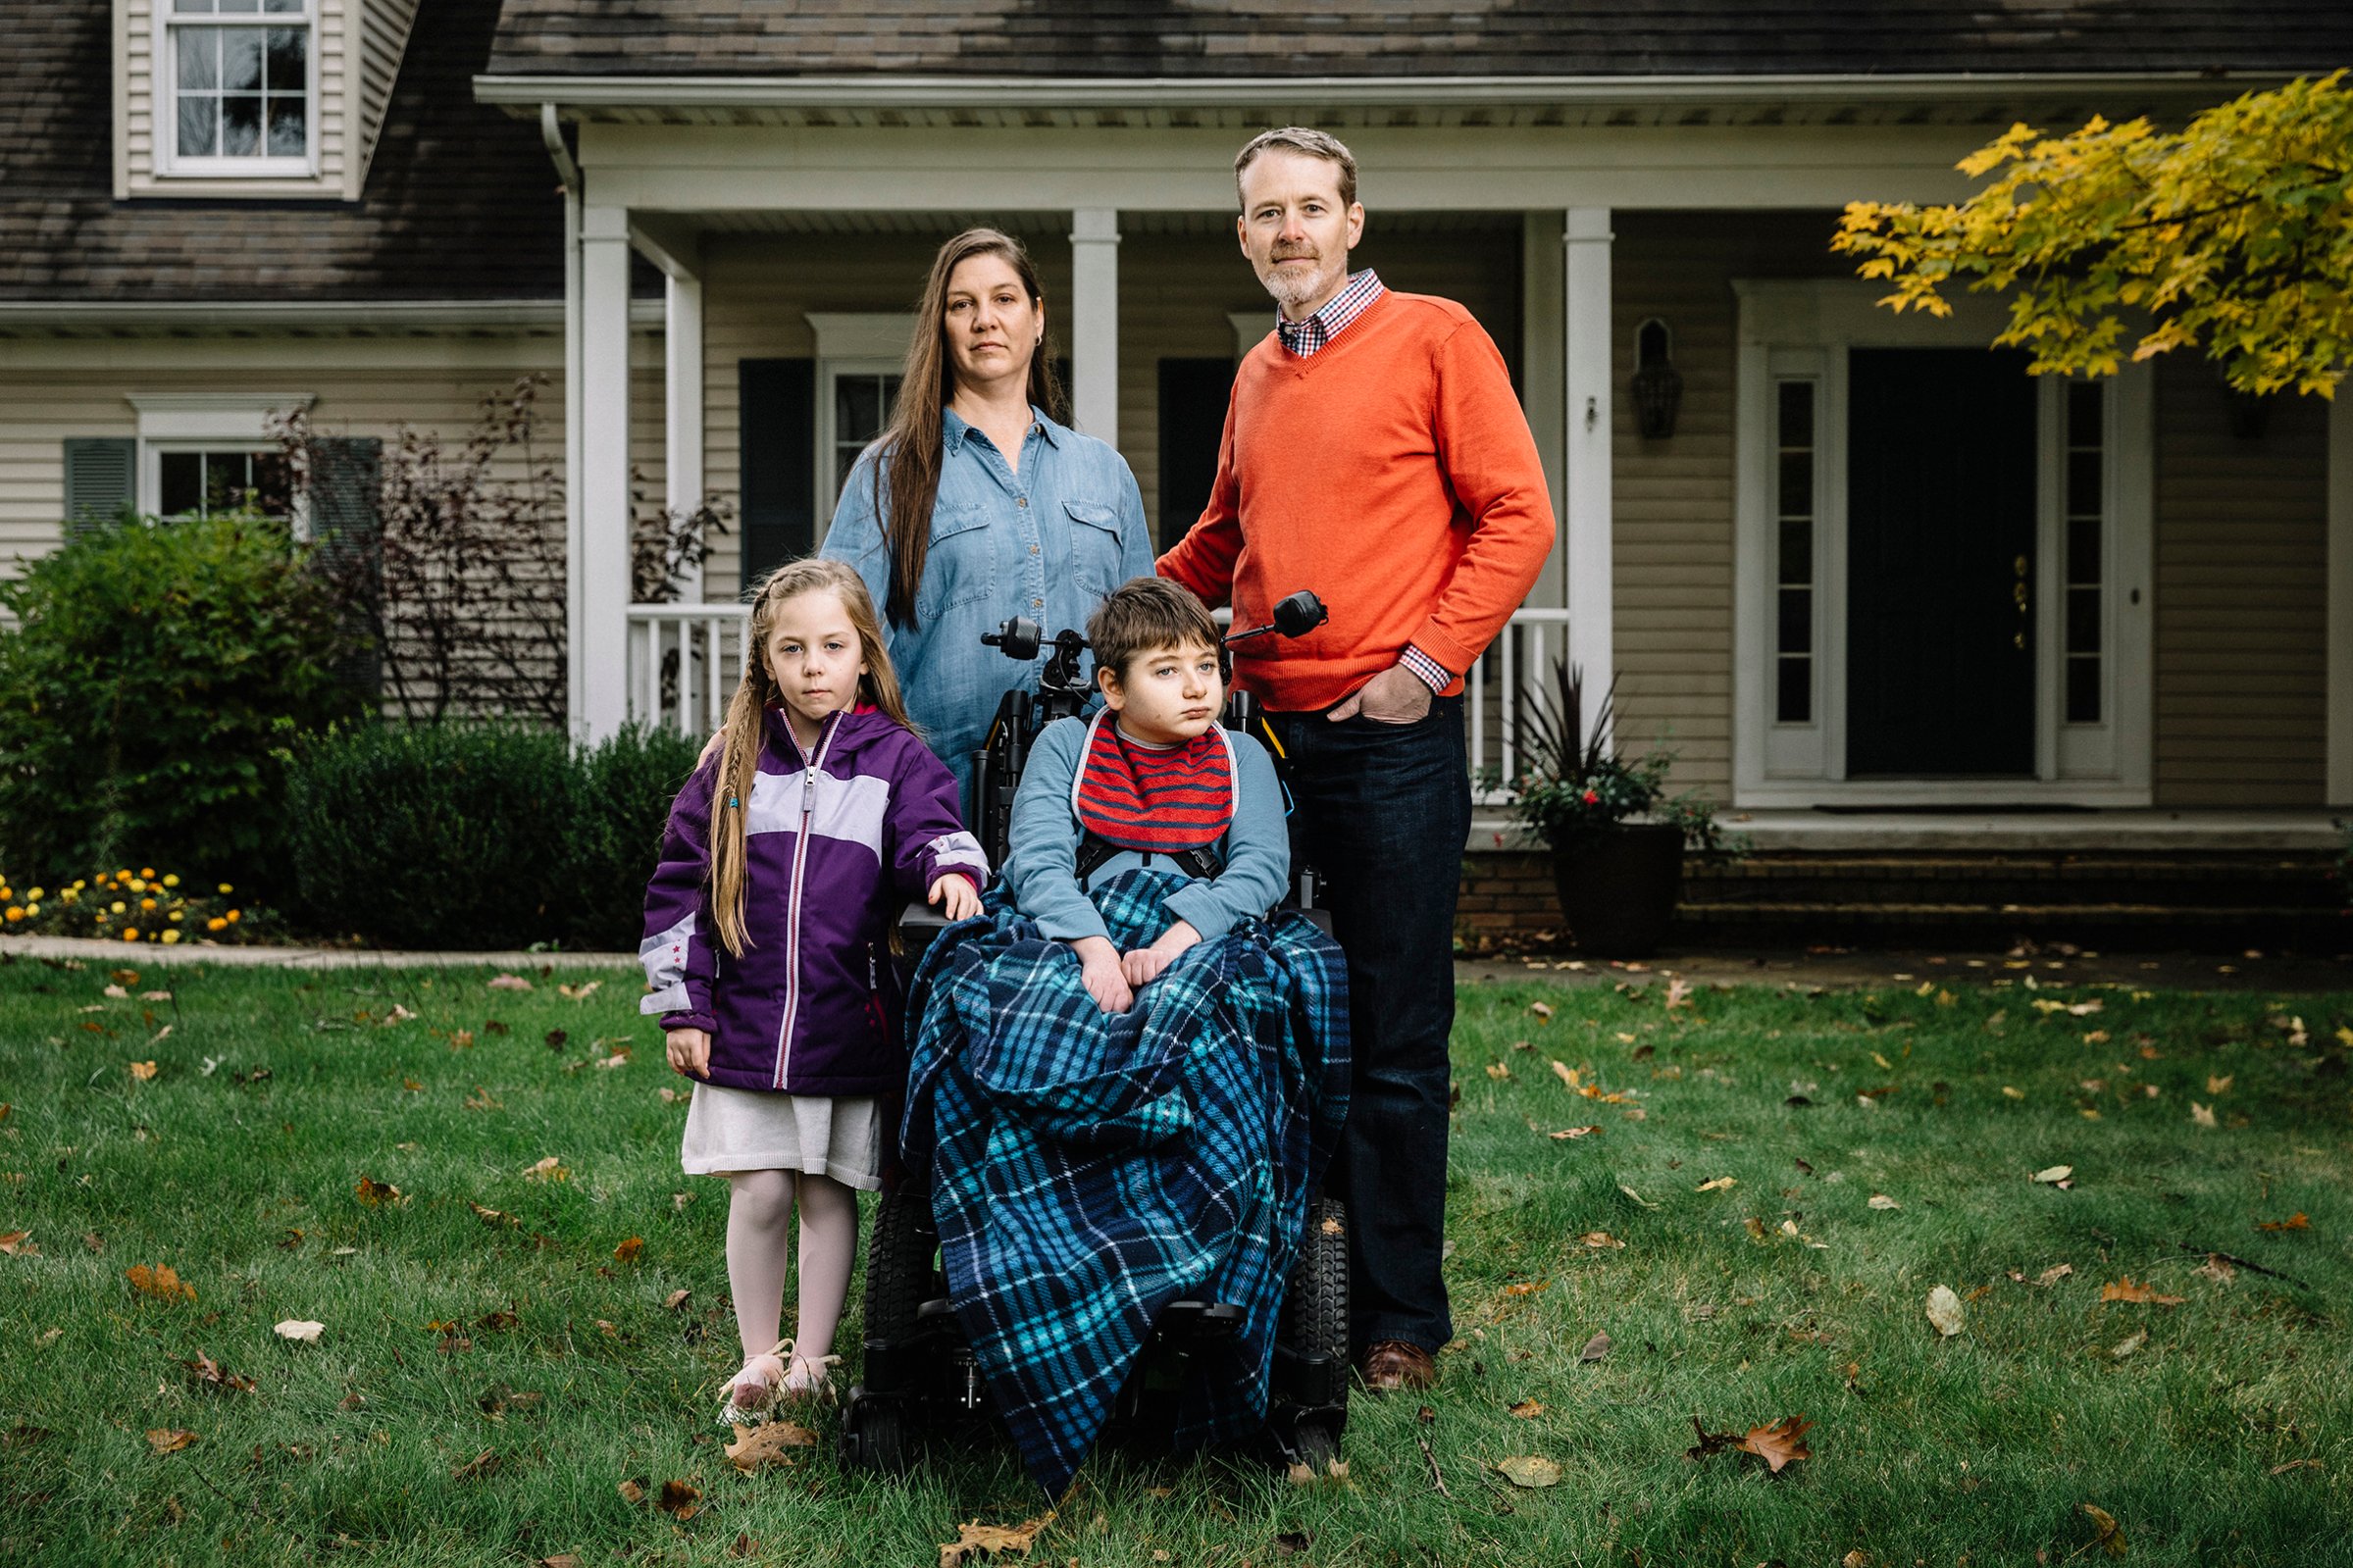 Christine and Larry Callahan, with kids Claire, 5, and Andrew, 11, in front of their home in Cleveland’s northeast suburbs